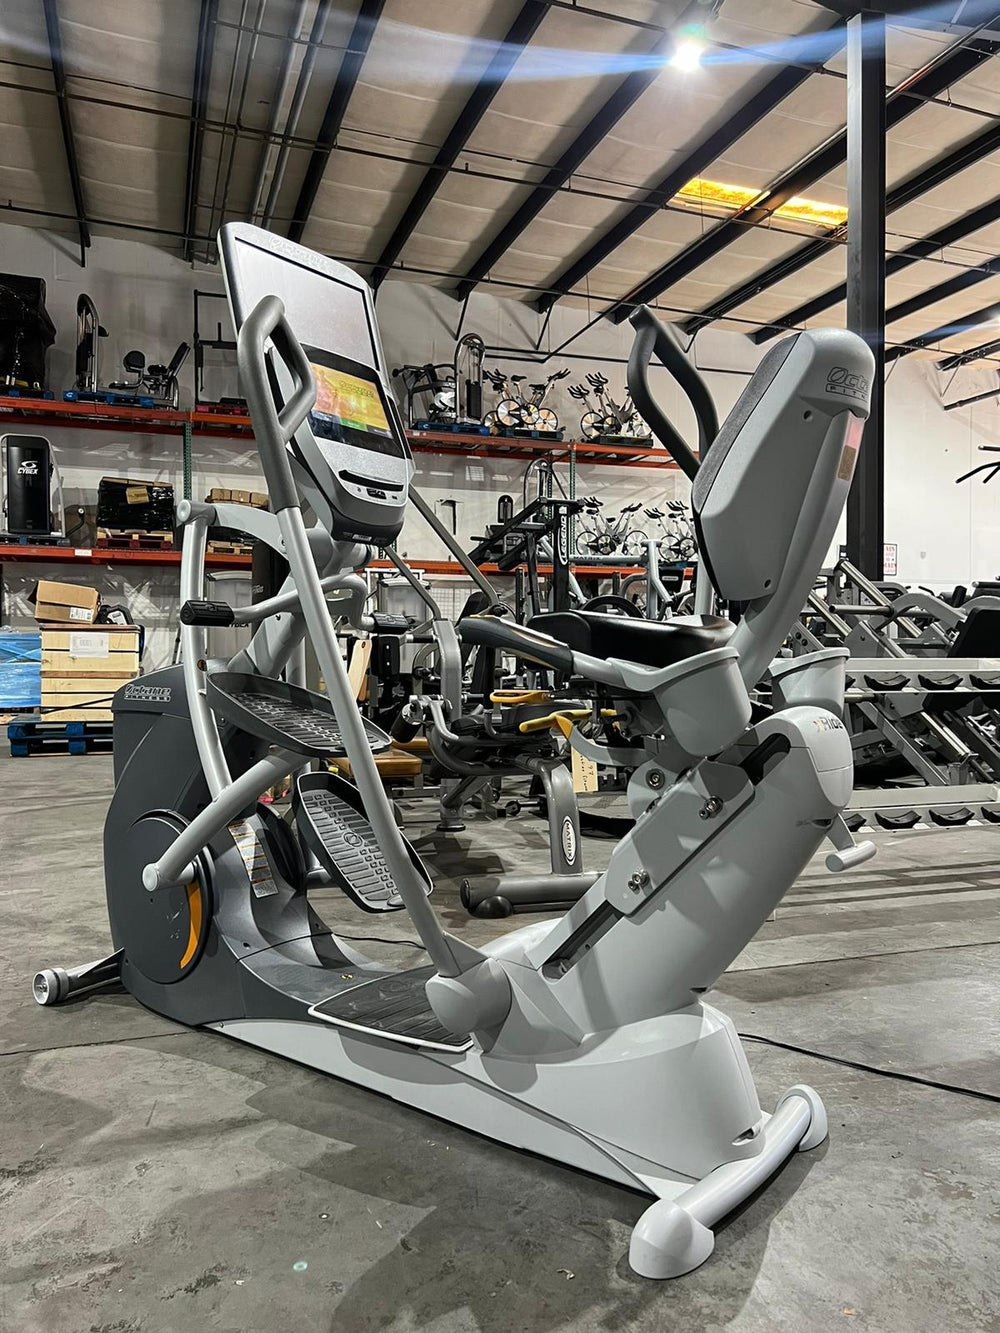 Octane X Ride / Xr6 Recumbent Seated Stepper Elliptical - Refurbished - Buy & Sell Fitness